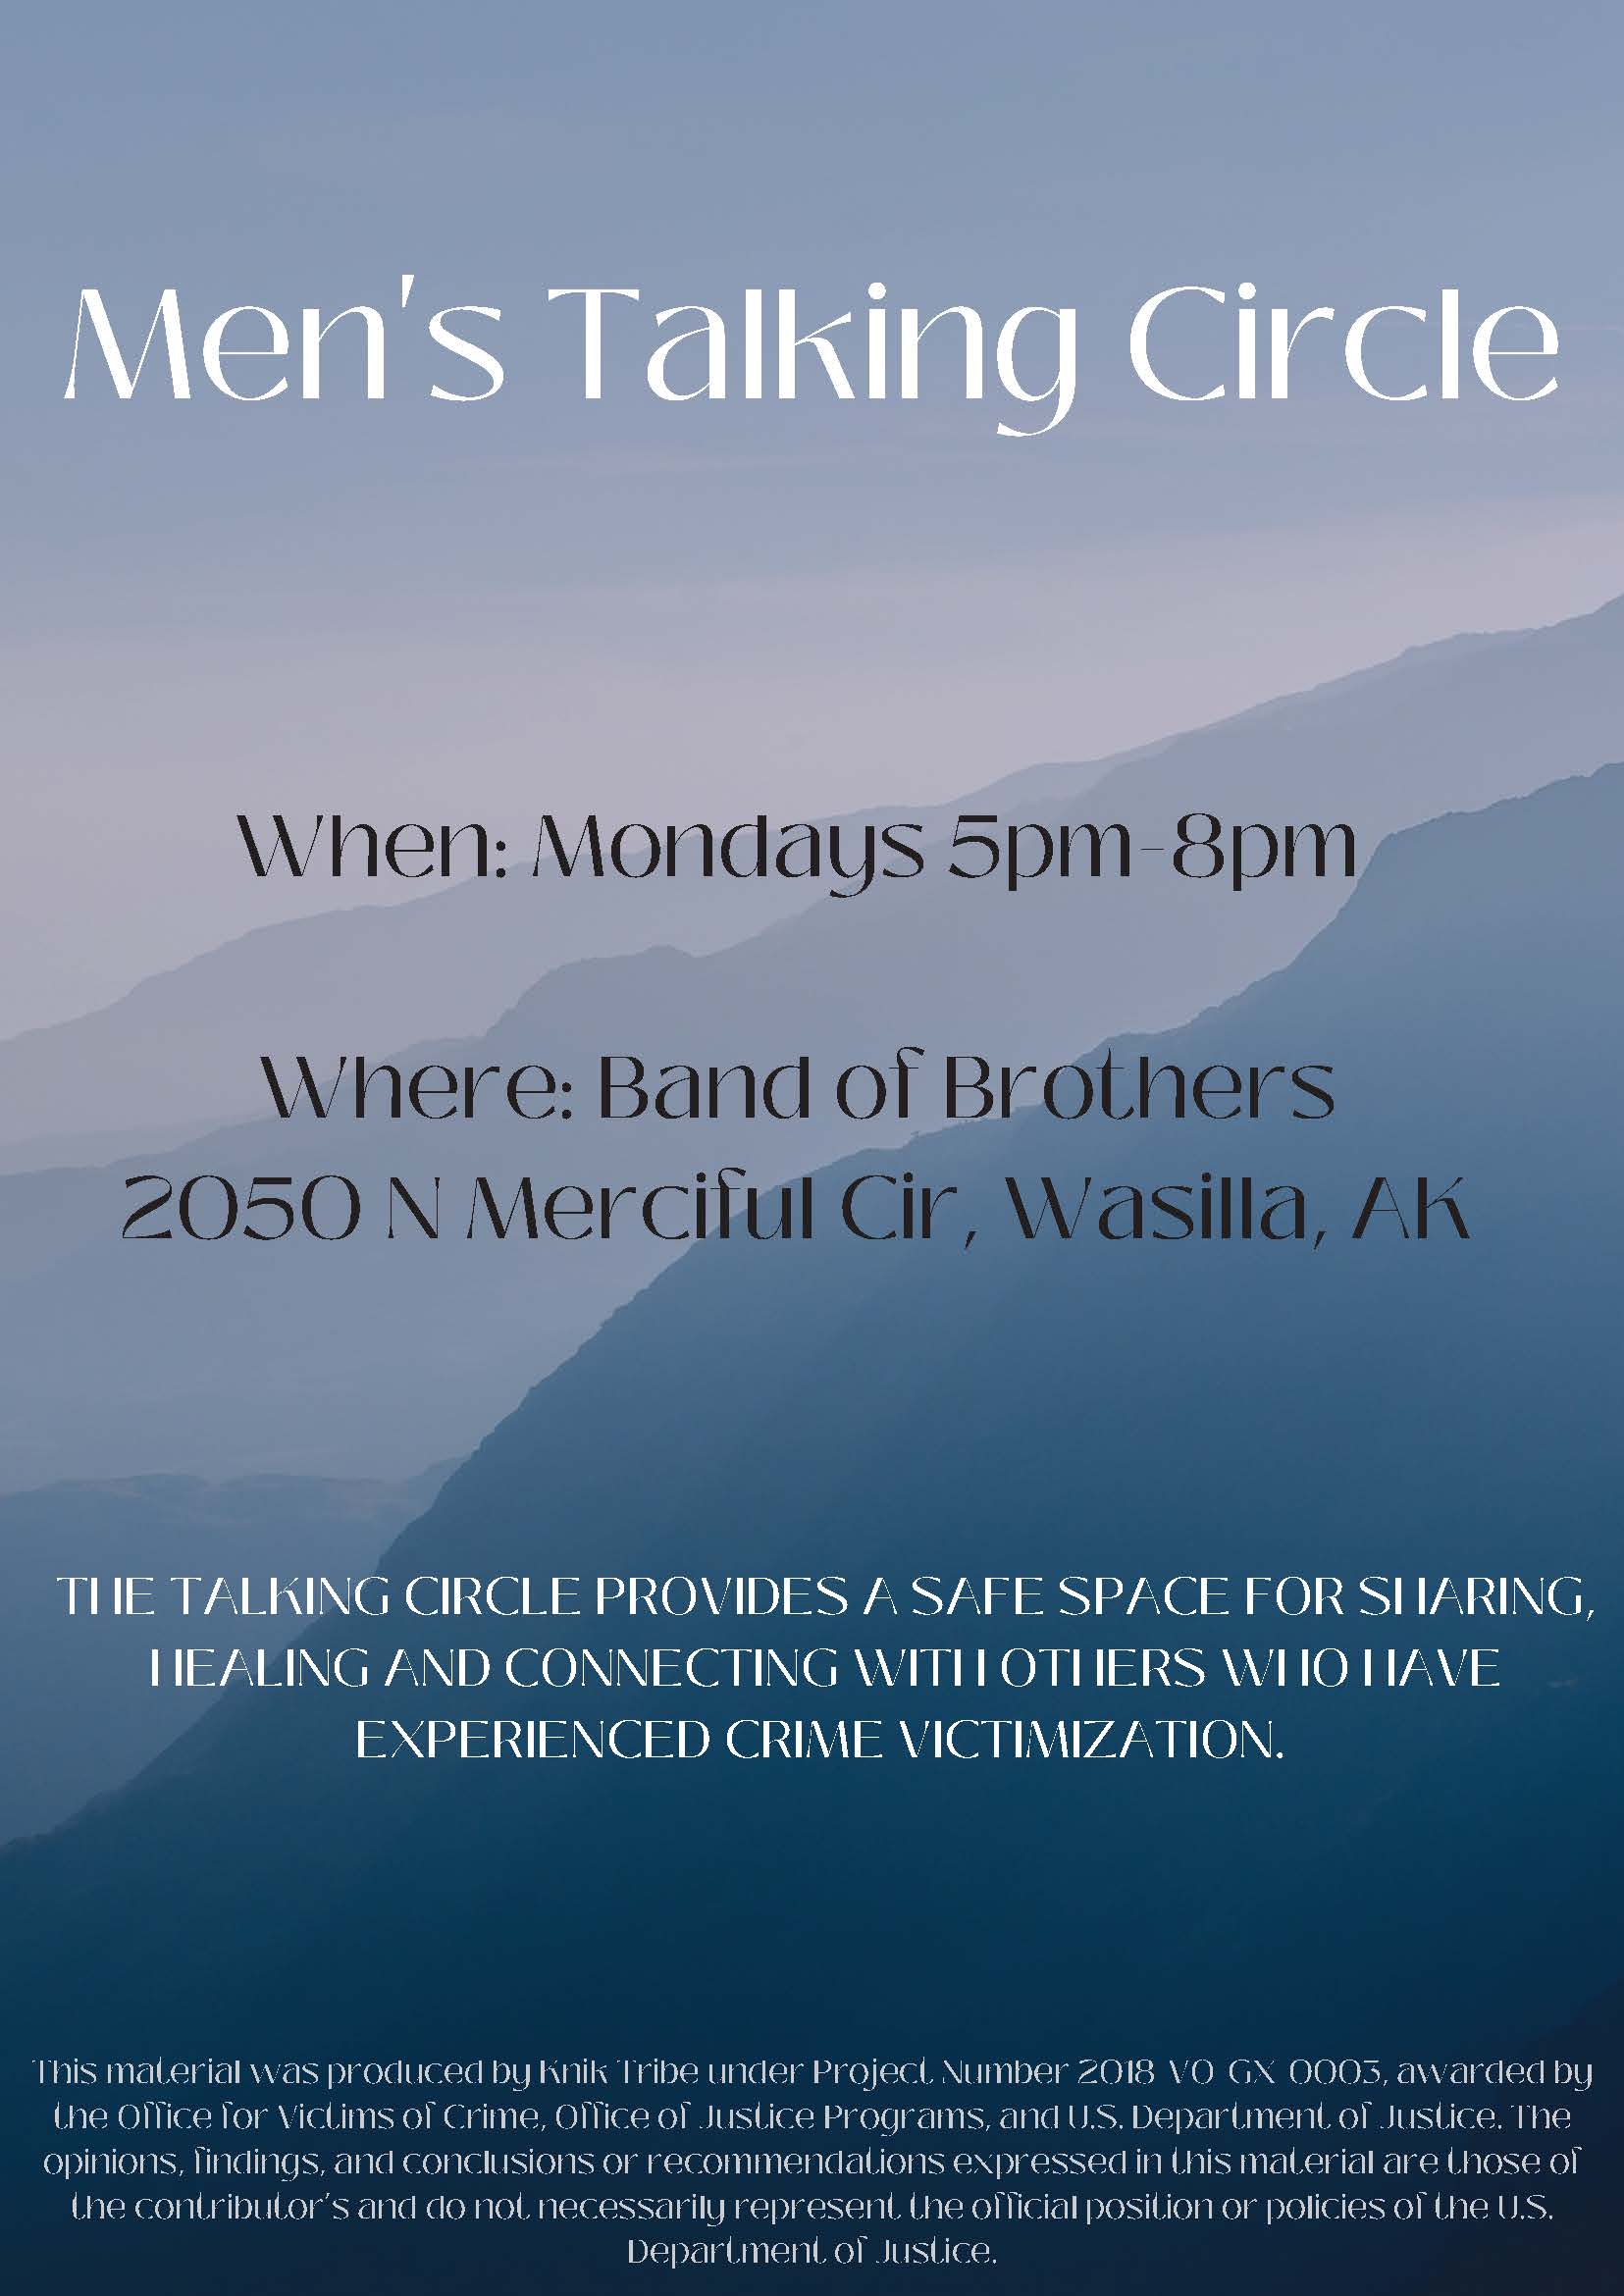 Flyer for Men's Talking Circle at Band of Brothers